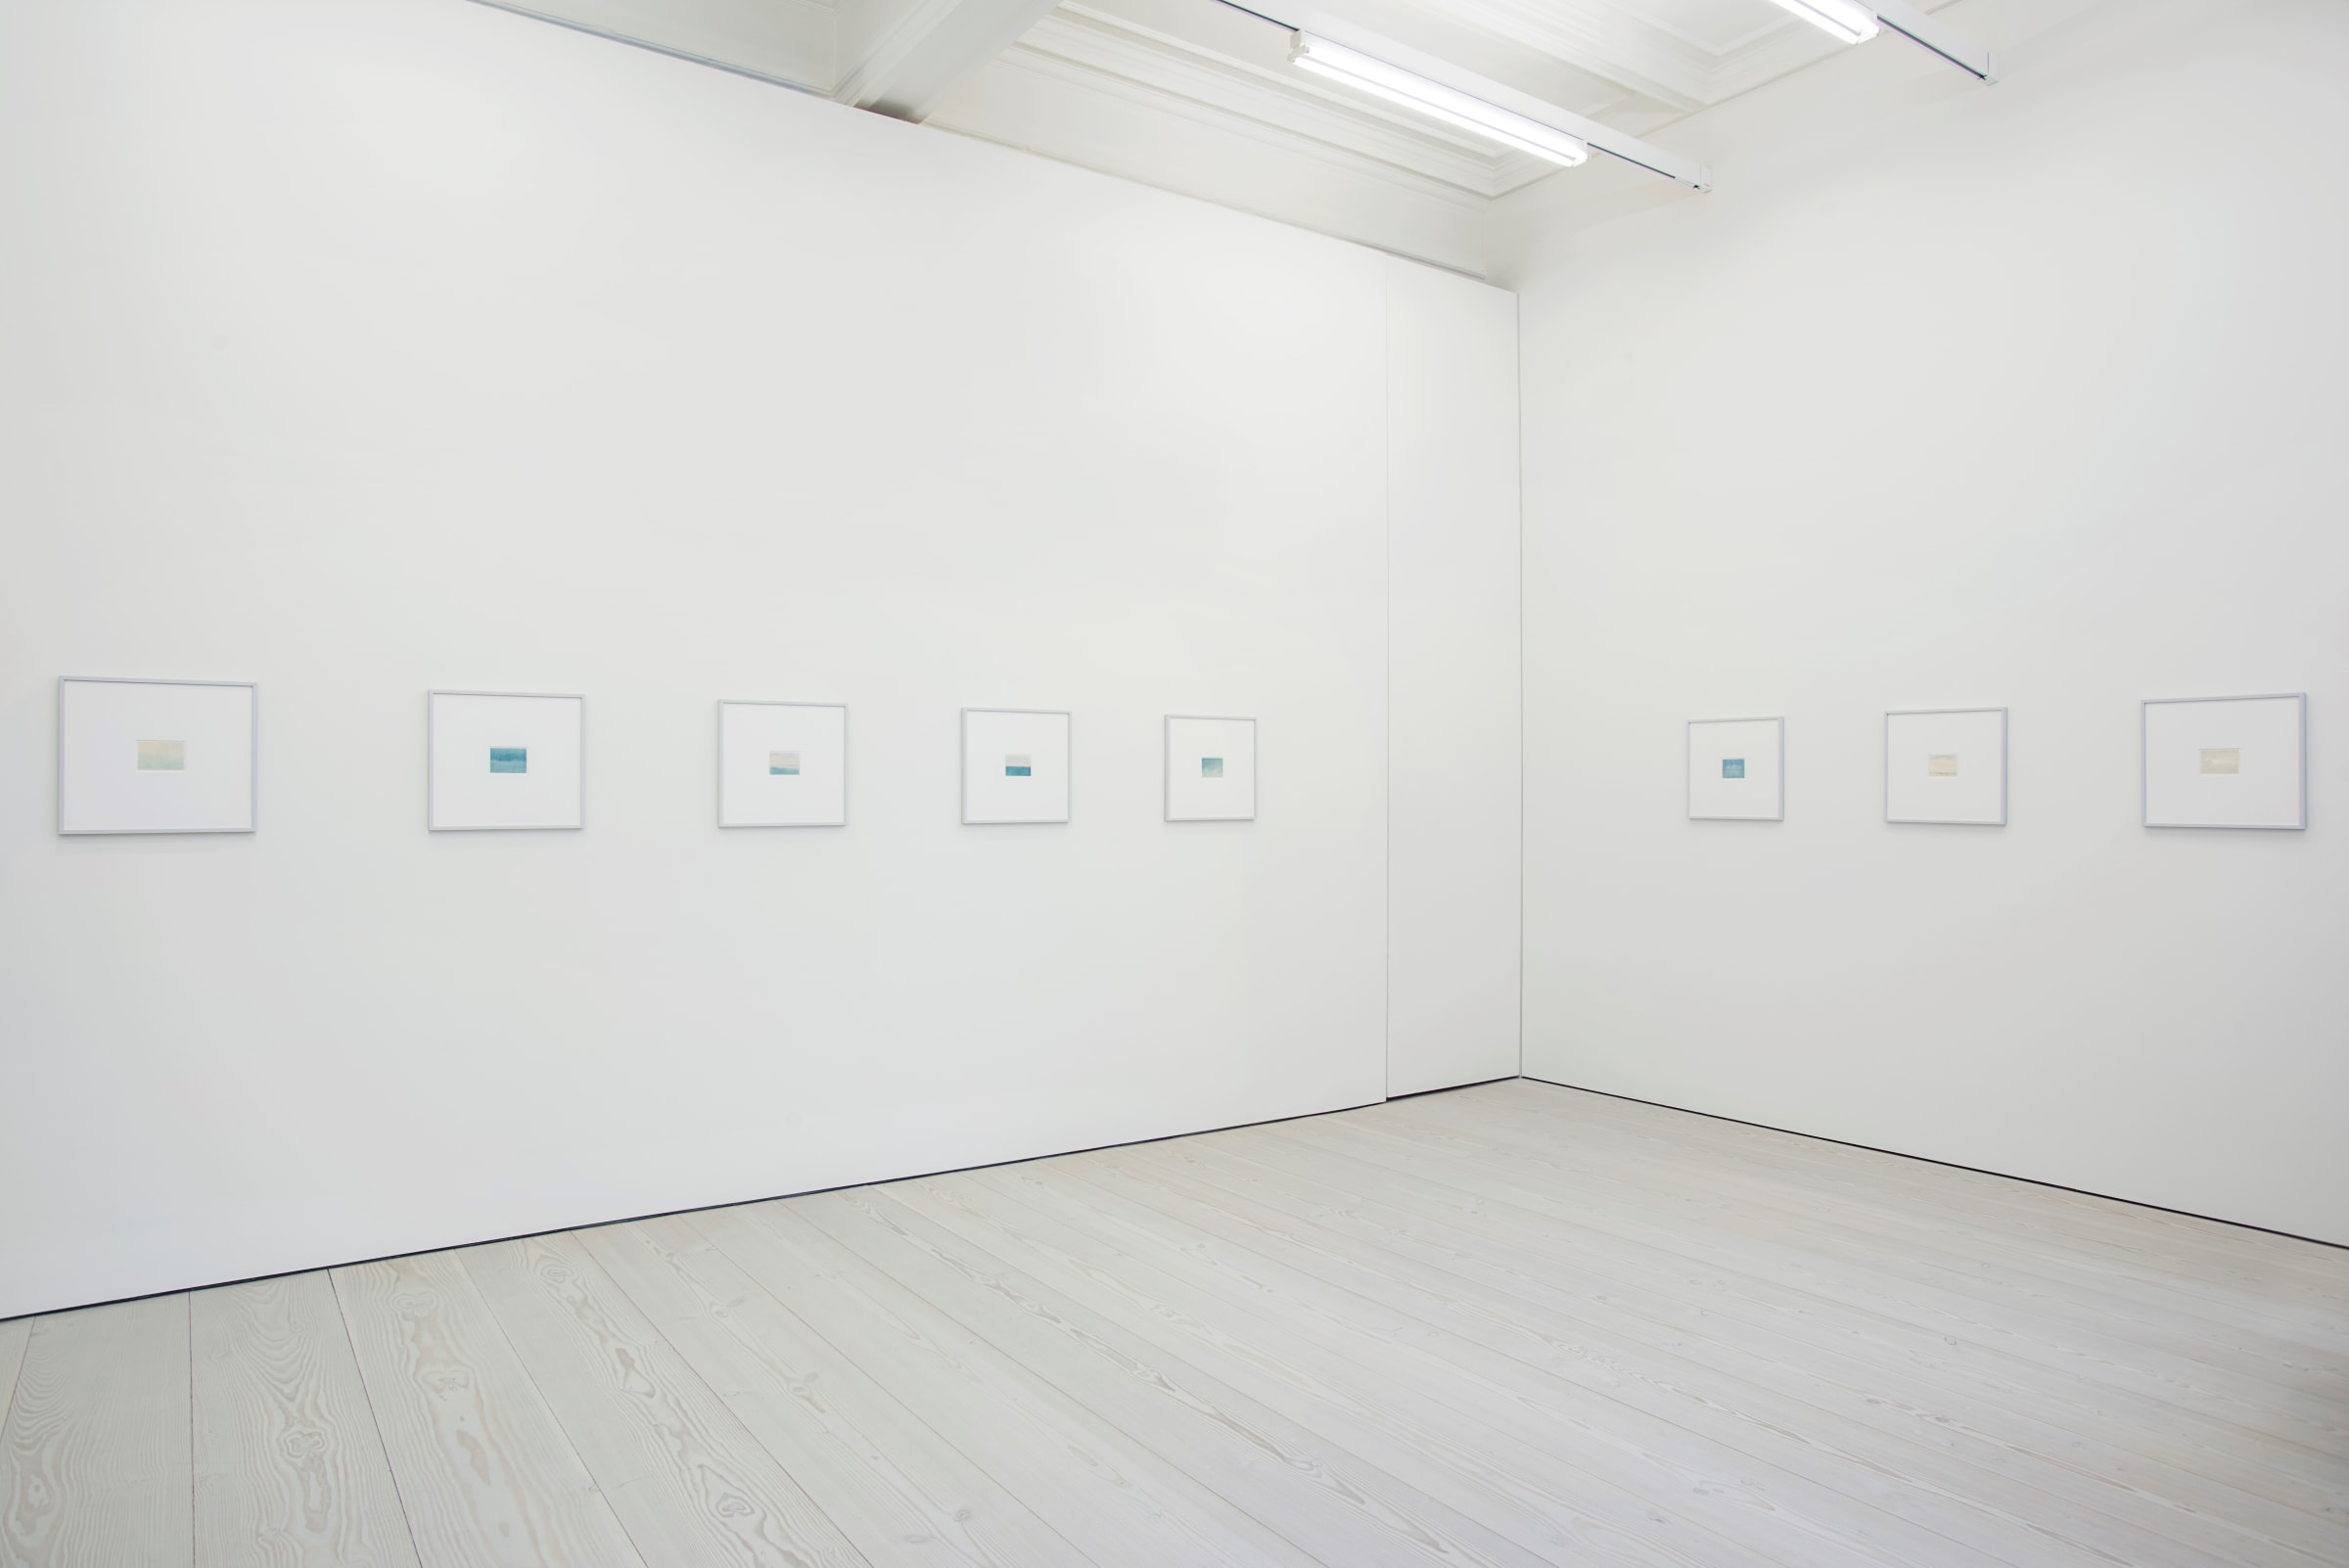 In a white space, 8 small drawings, 5 on the left wall and 3 on the right, hang. They are framed in white, and mostly made up of blues and yellows, like sunsets.